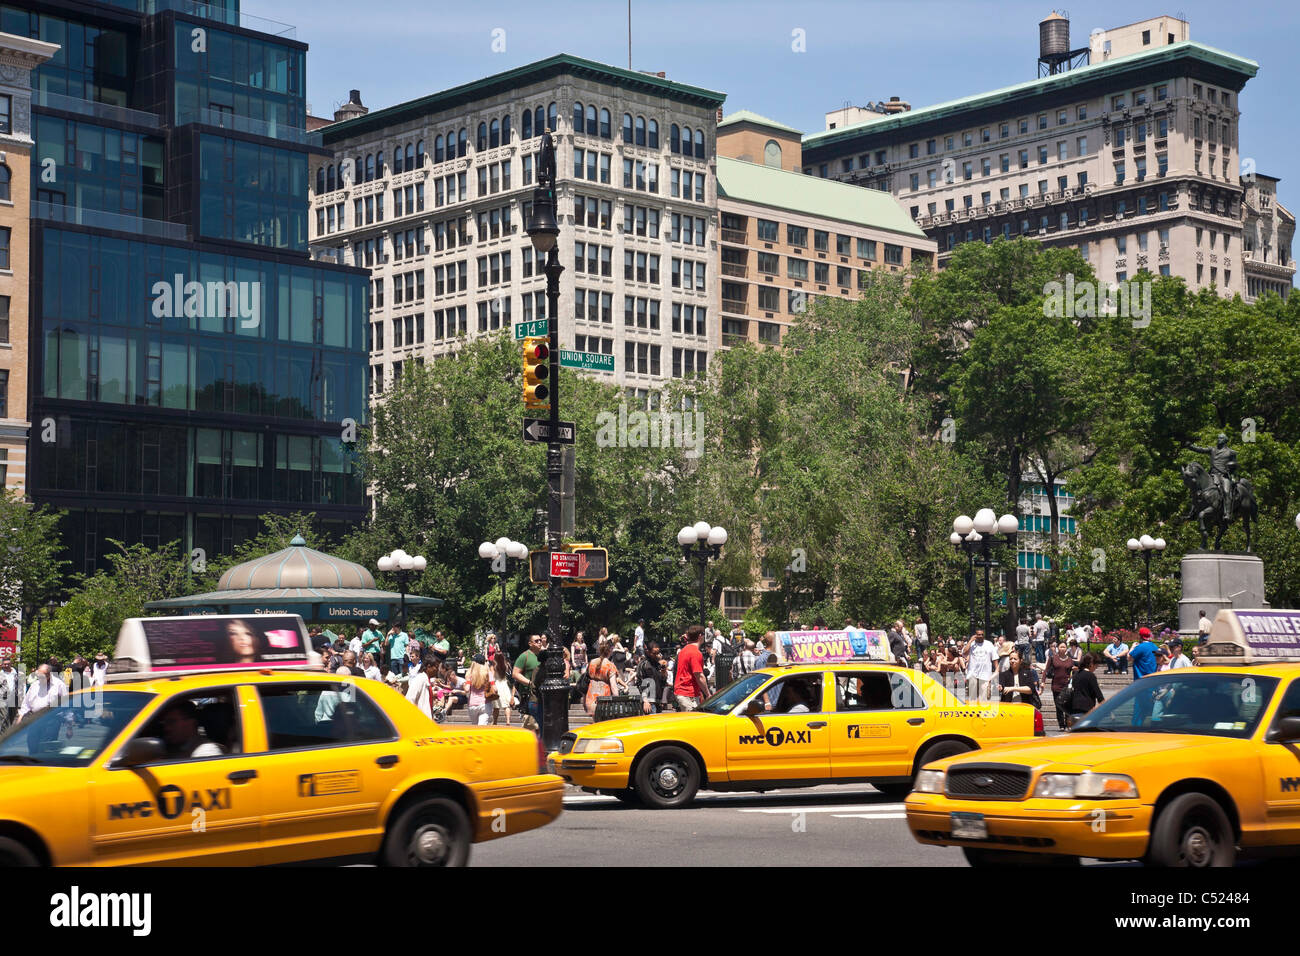 Union Square,14th Street Scene and Taxis, NYC Stock Photo